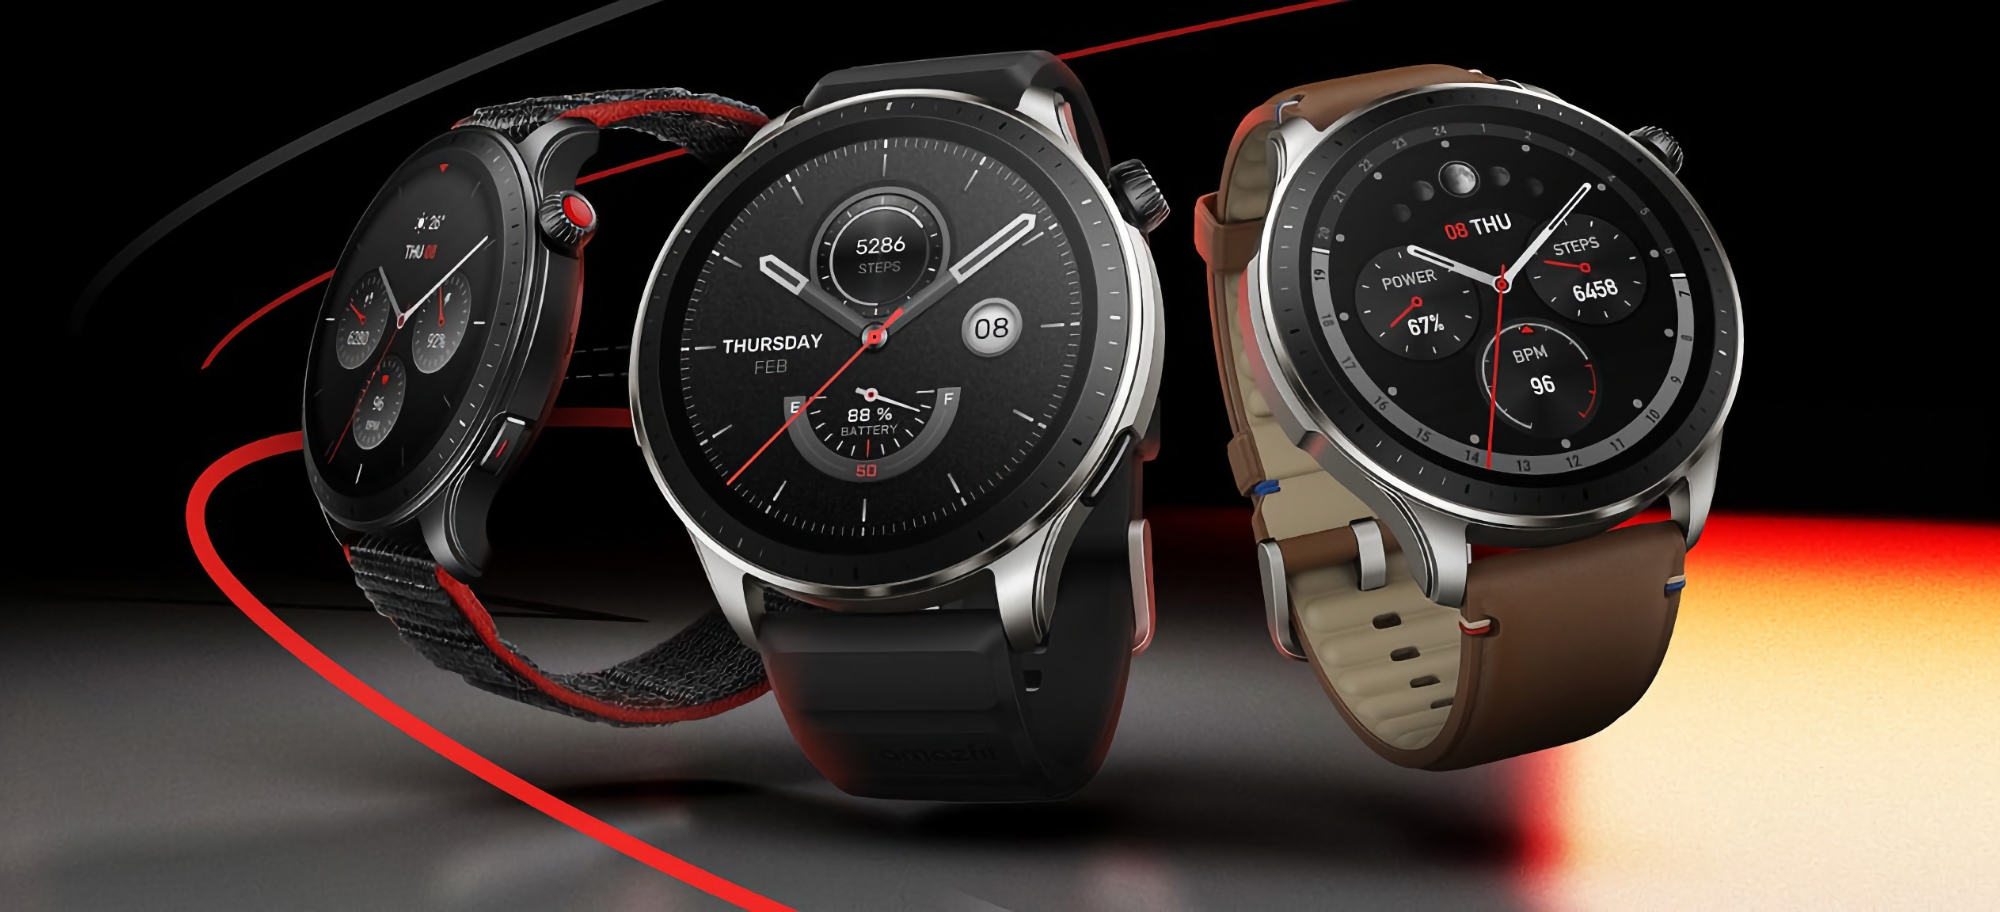 Amazfit GTR 4 is available on Amazon at a discounted price of $20